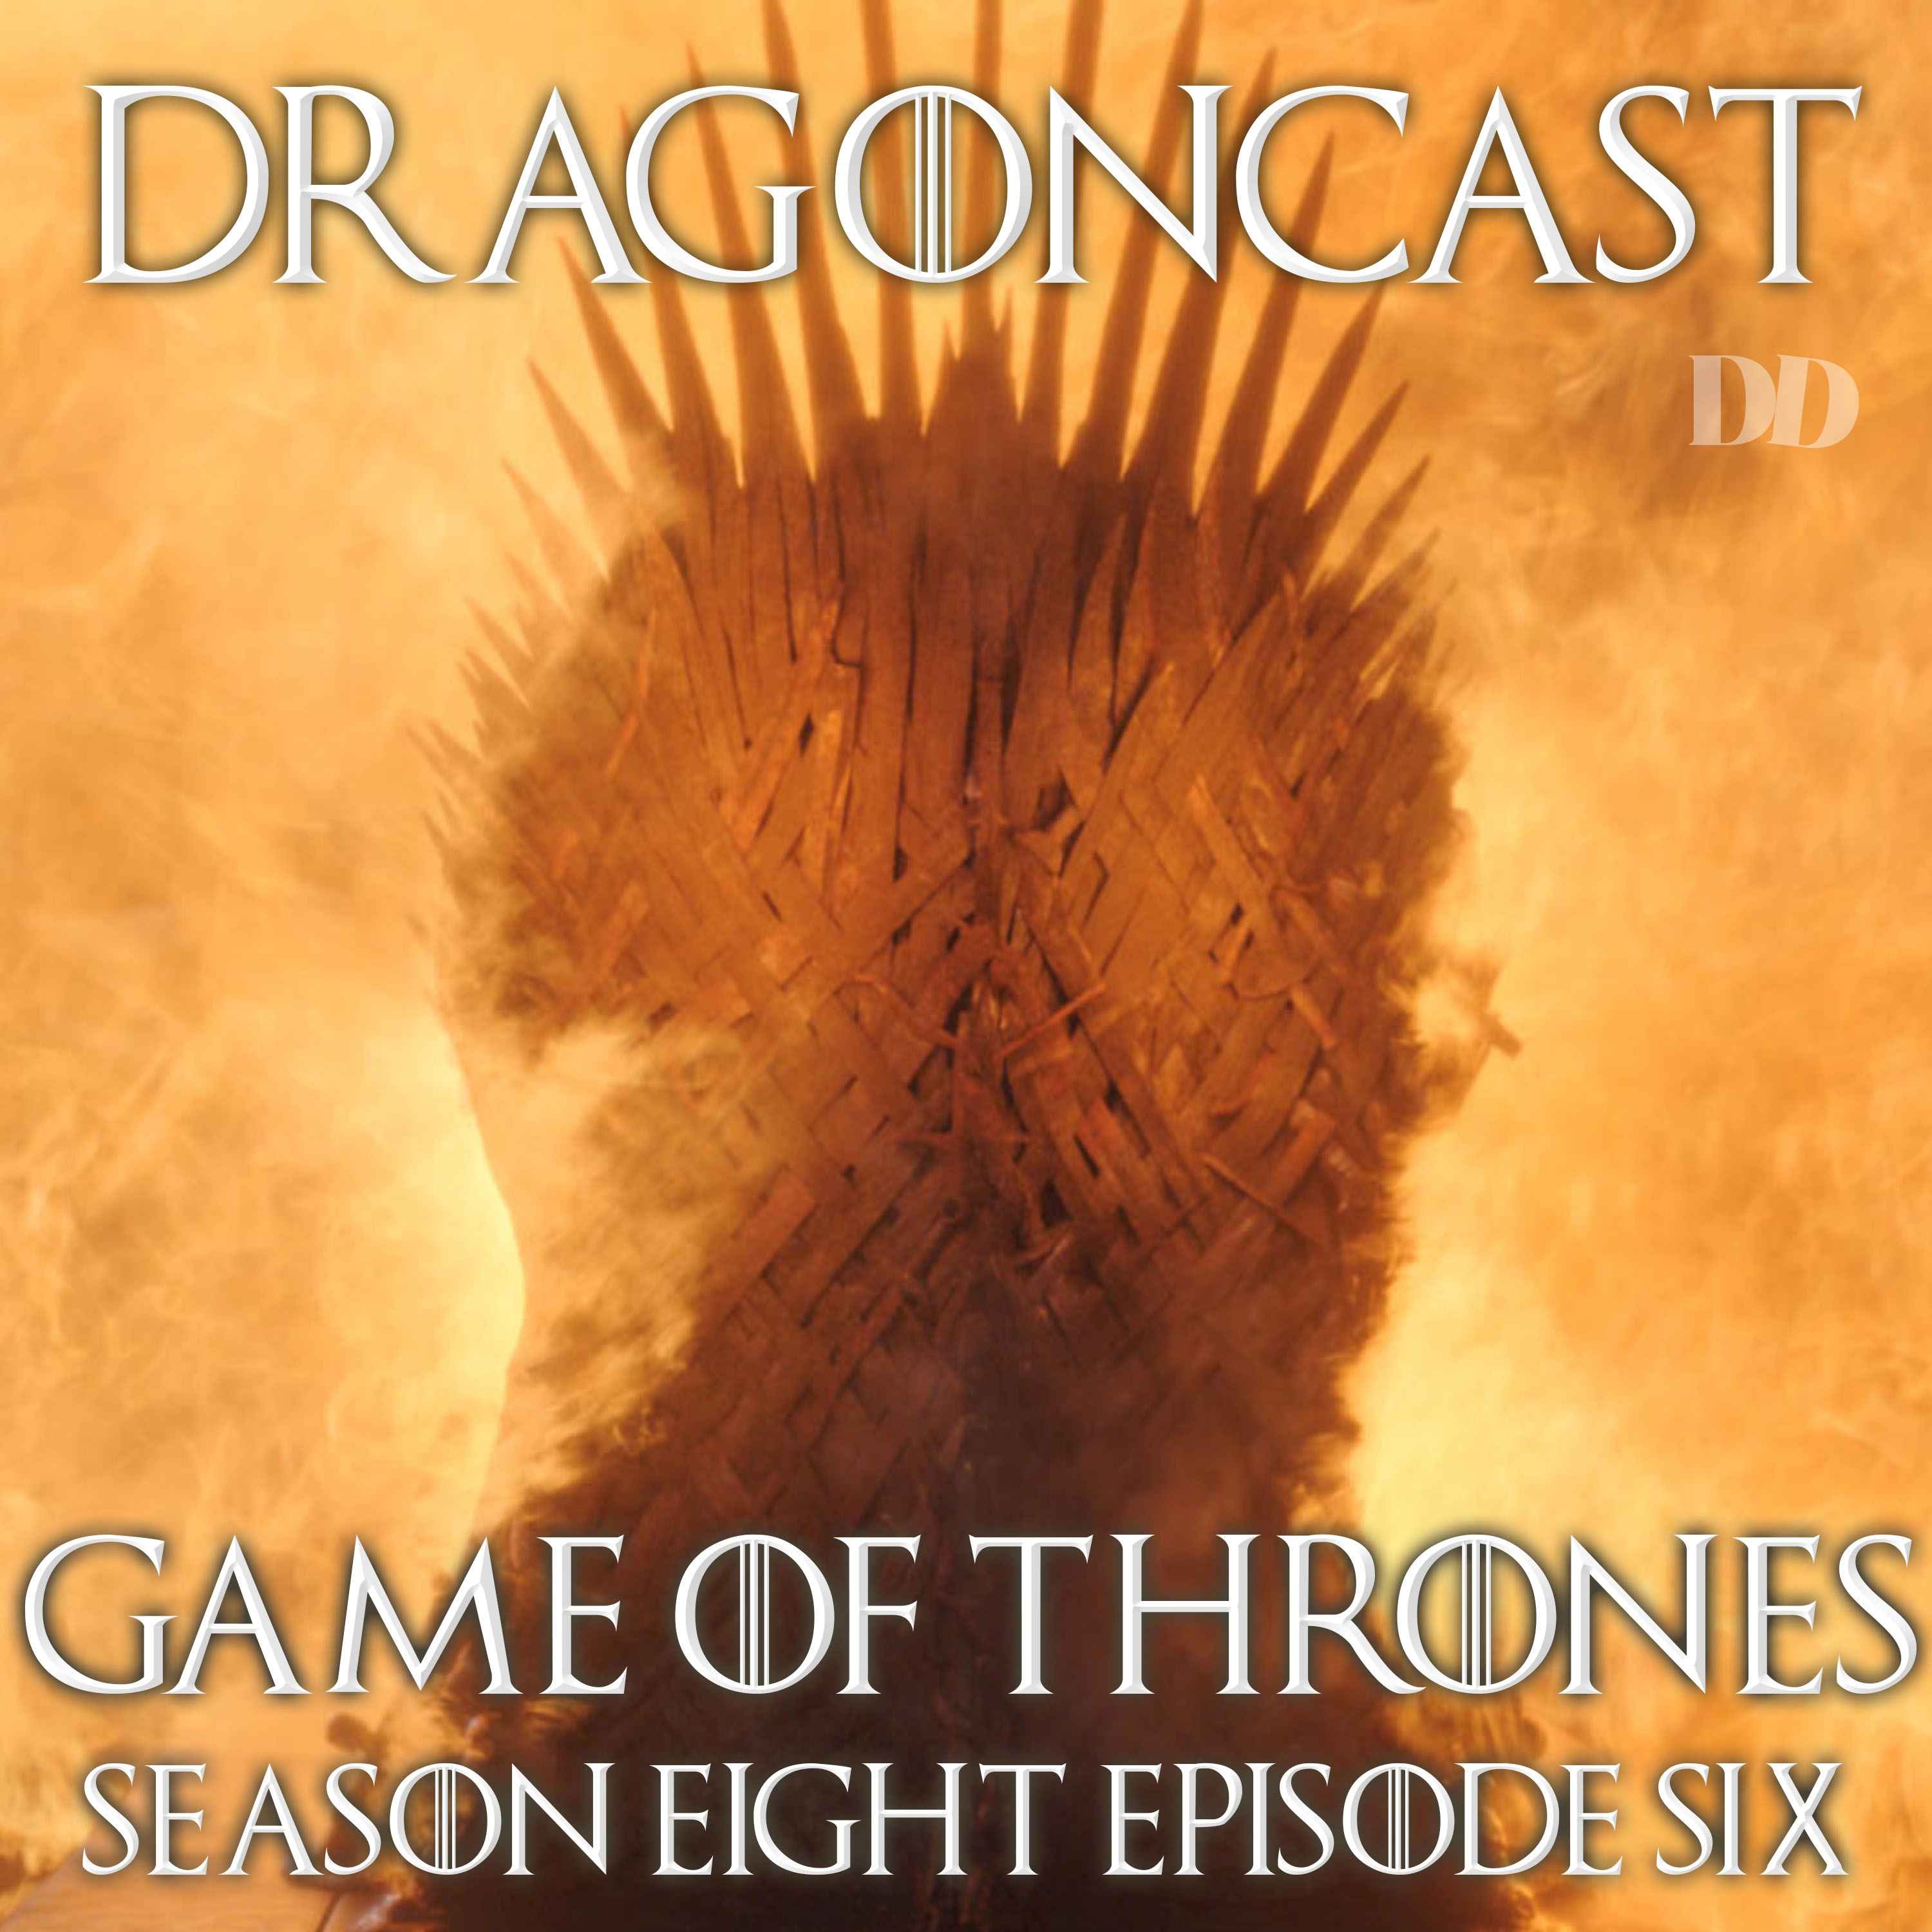 Game of Thrones Rewatch Episode: S8 E6 - The Iron Throne PART 2